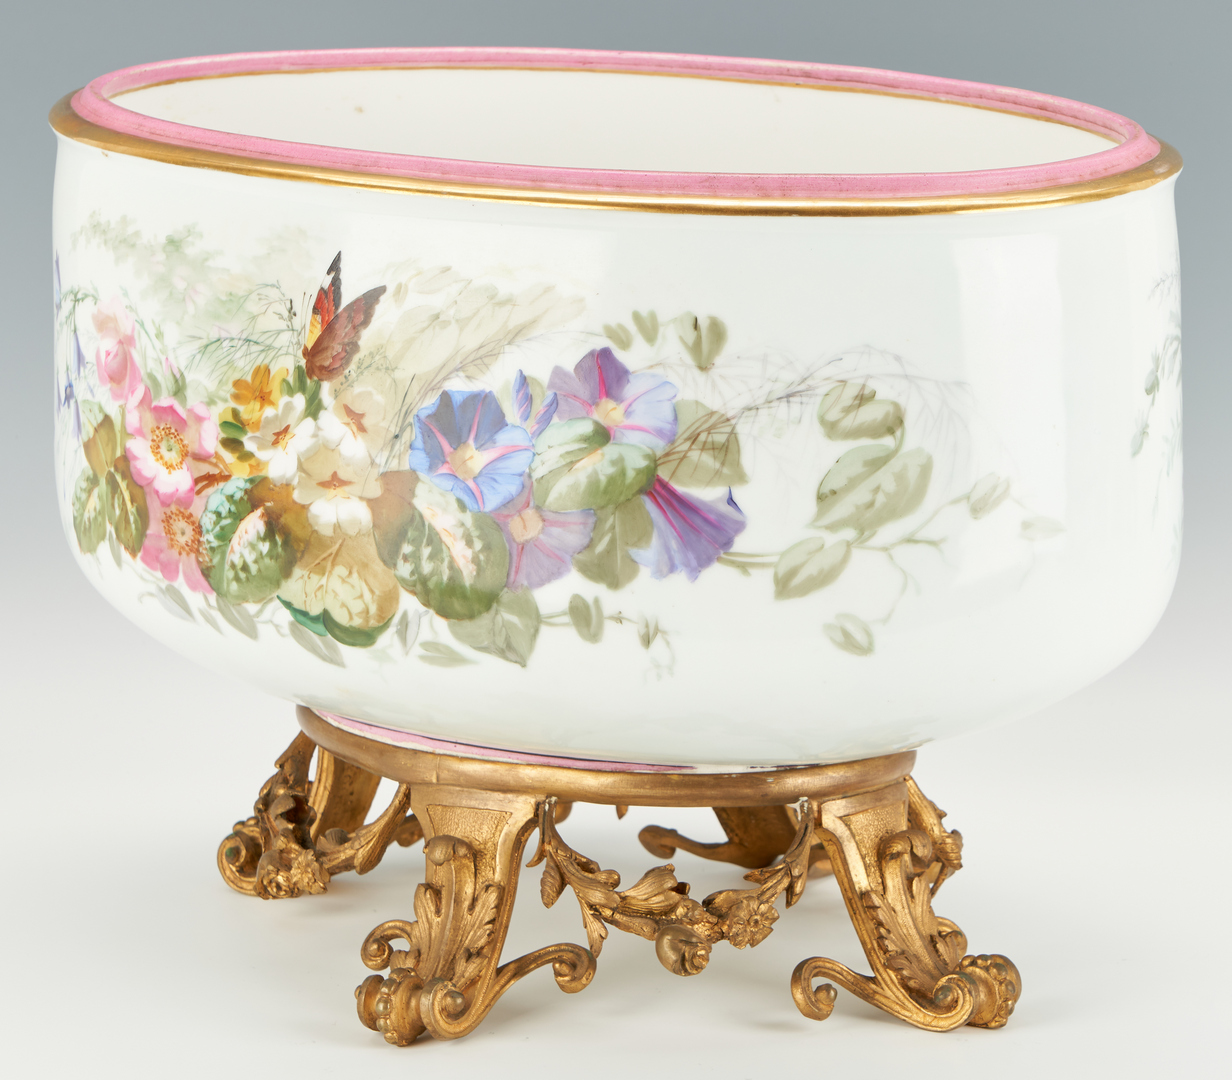 Lot 348: Large French Porcelain Jardiniere with Bronze Mounts, 19th Century